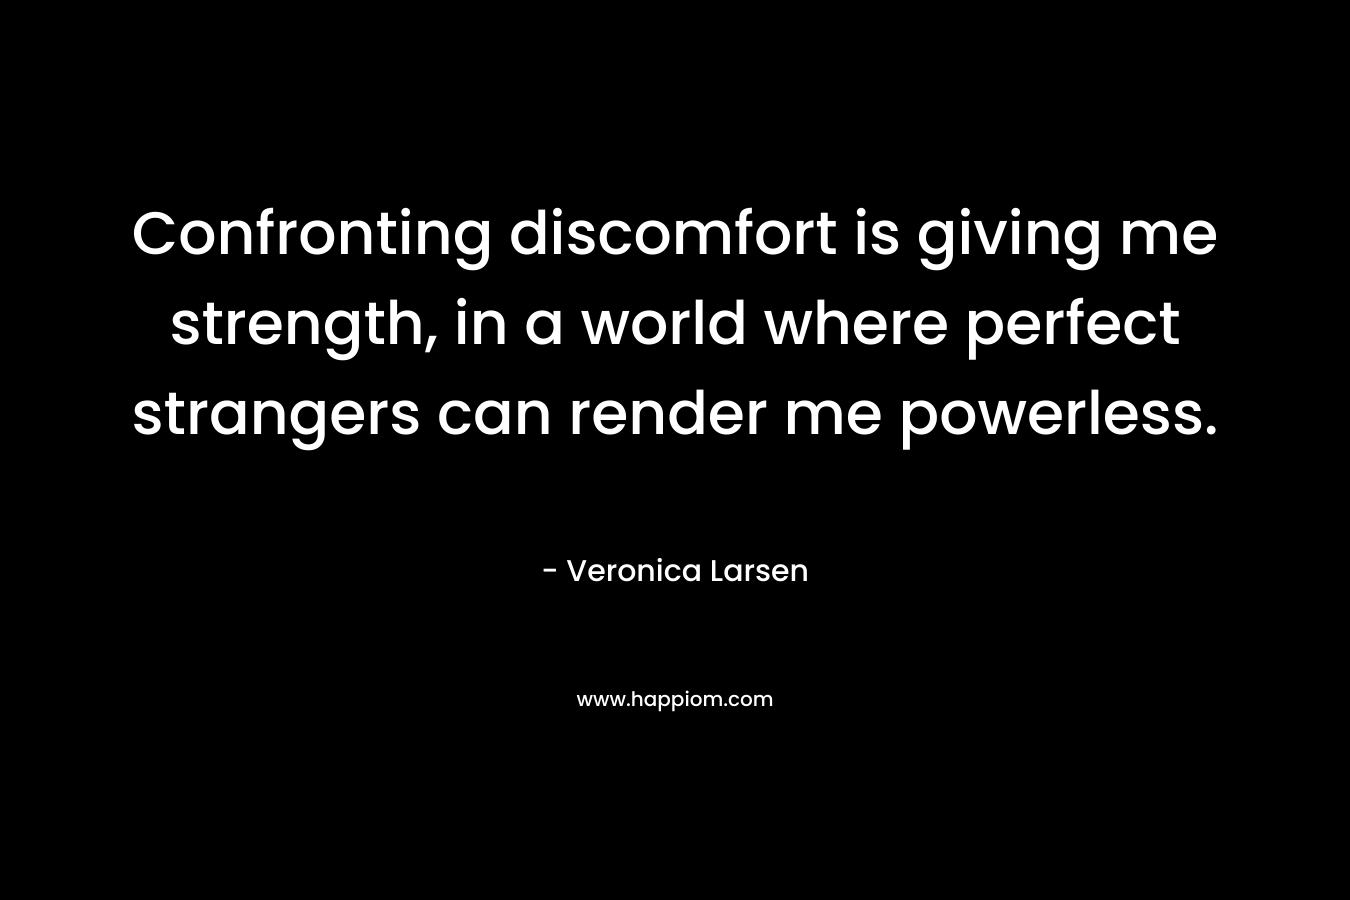 Confronting discomfort is giving me strength, in a world where perfect strangers can render me powerless. – Veronica Larsen